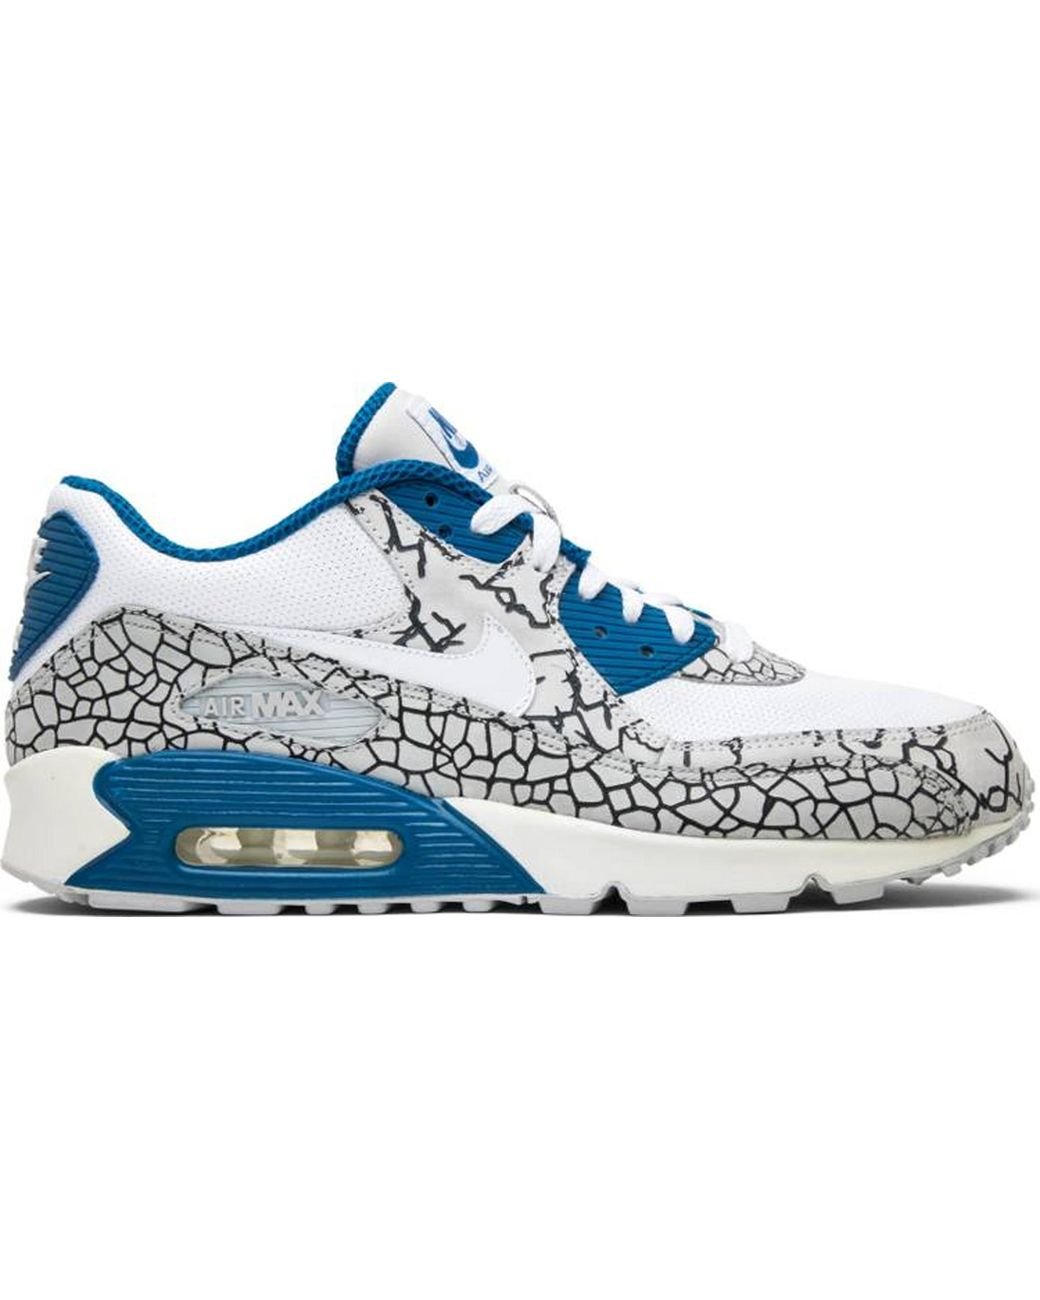 Nike Air Max 90 Current Hufquake in 